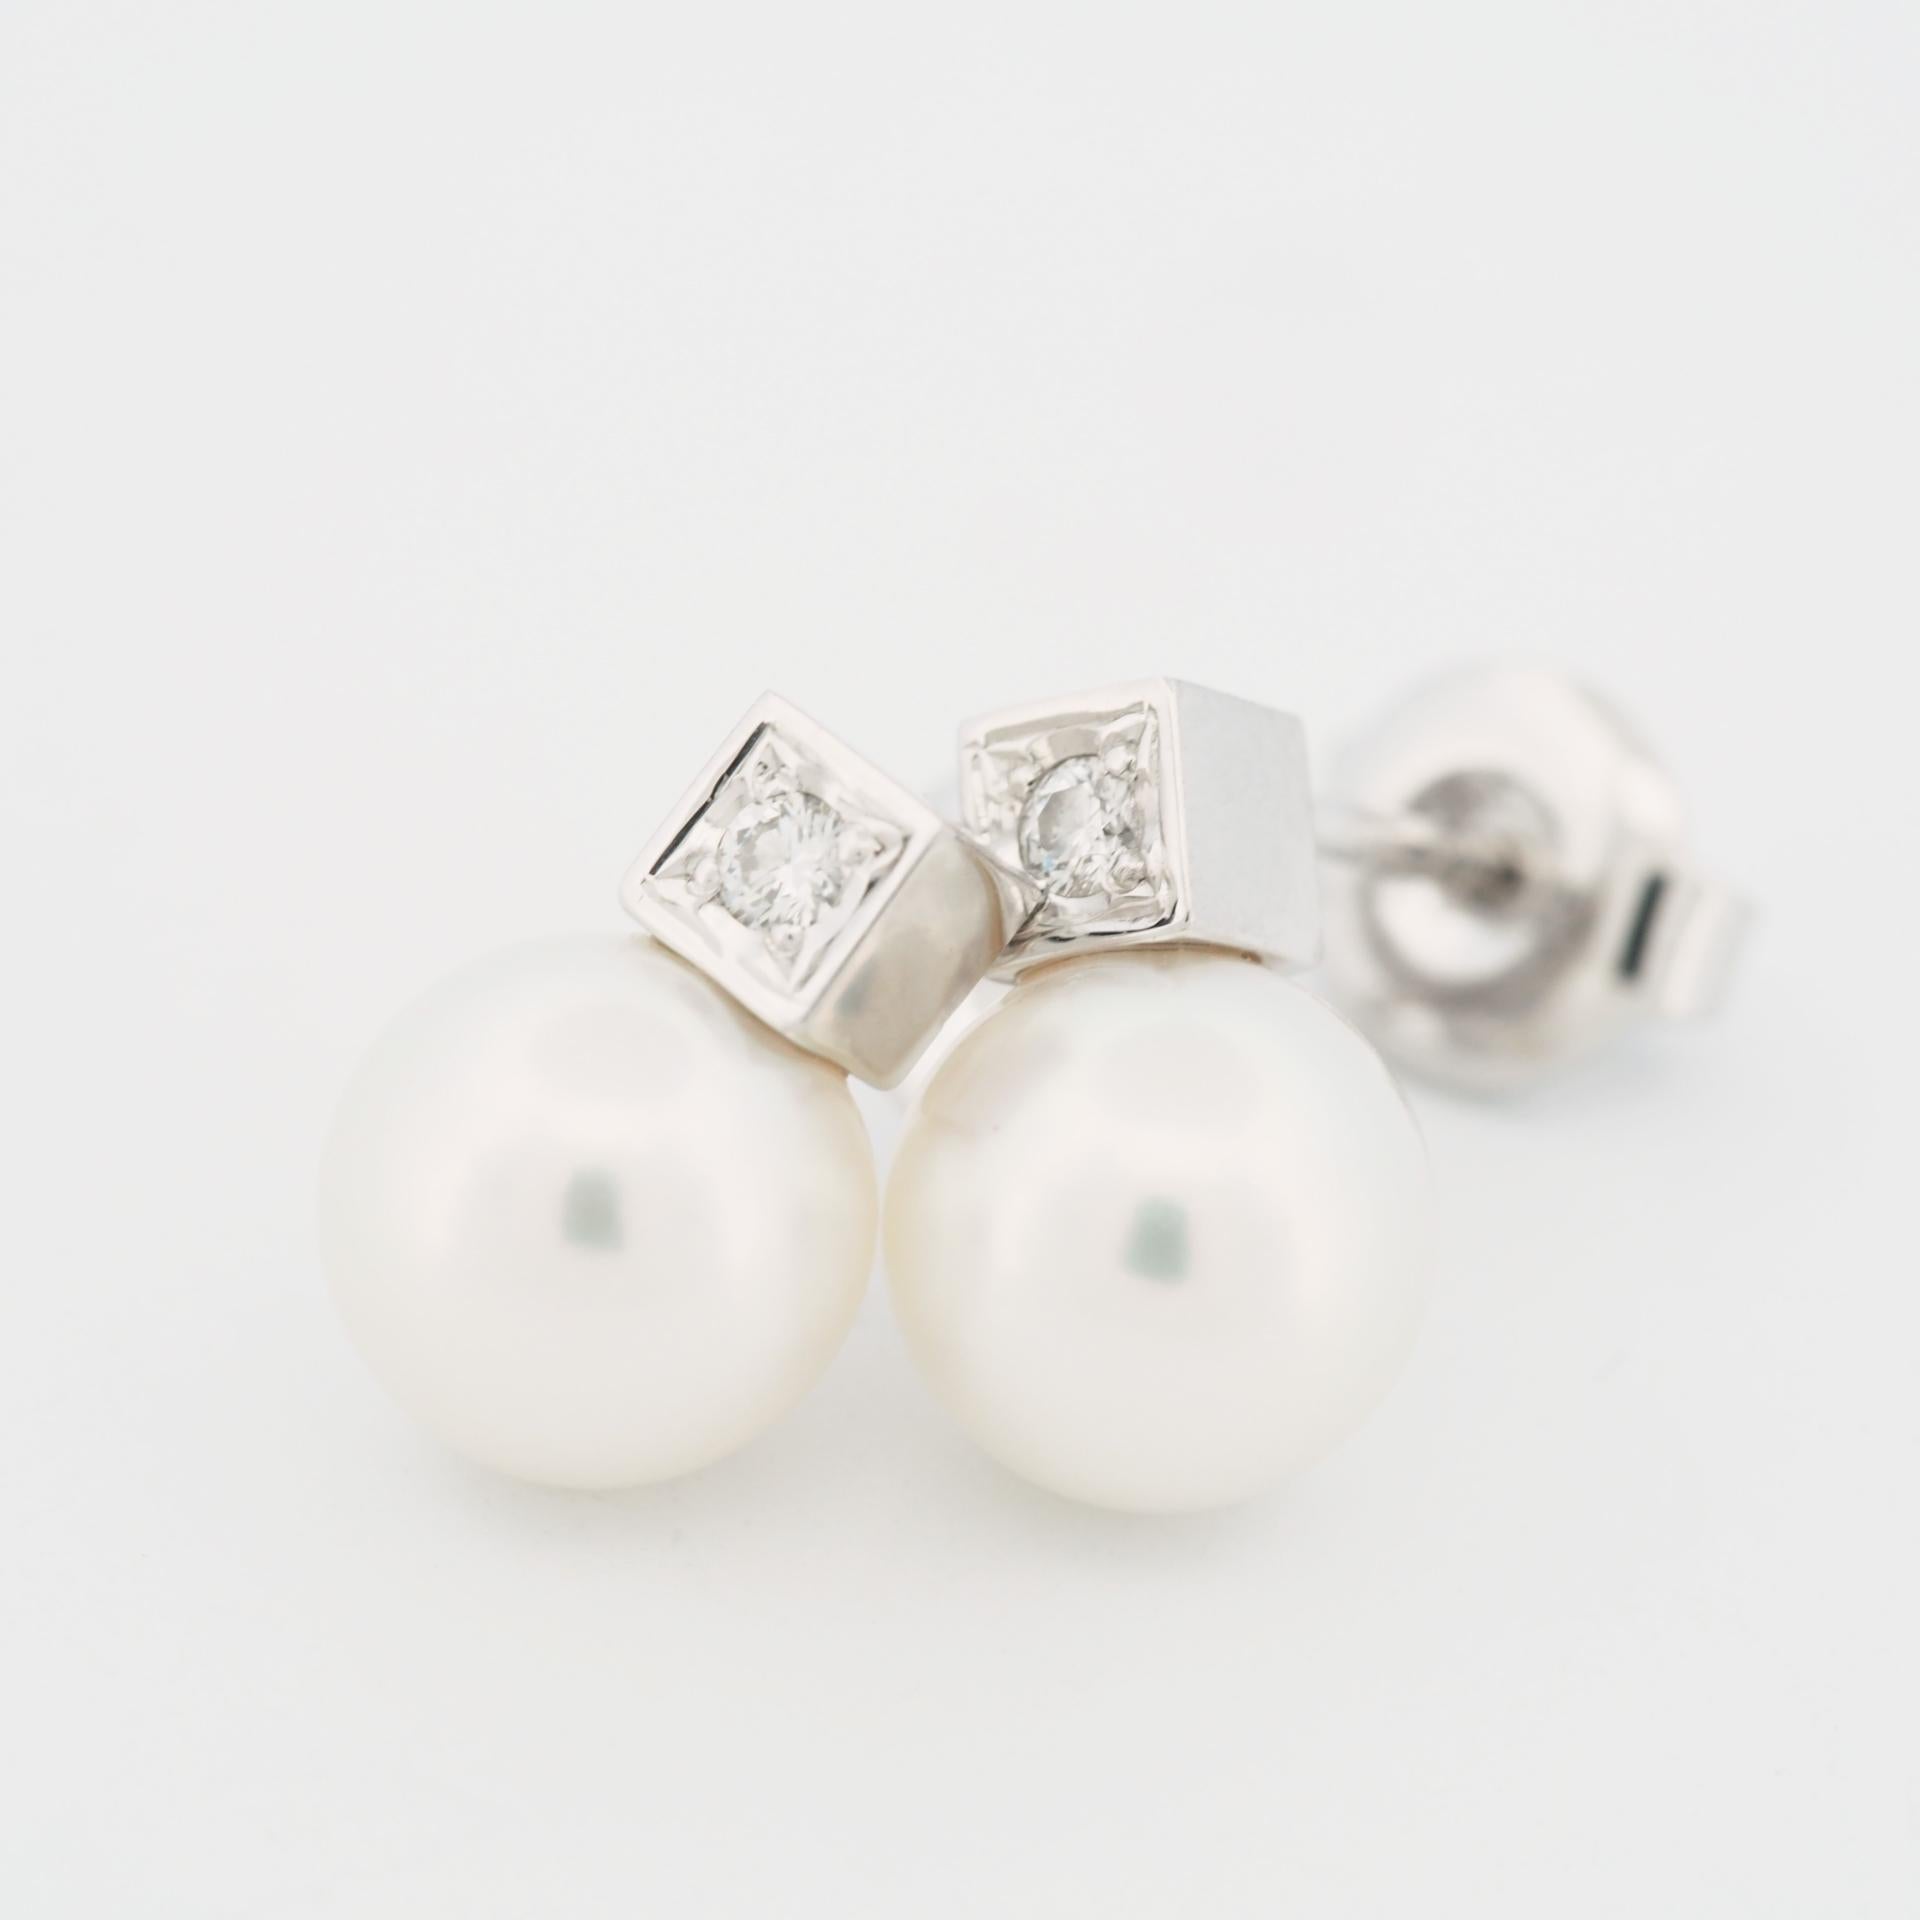 Item: Mikimoto Akoya Pearl Post Earrings
Stones: 7.25mm Akoya Pearl / Diamond (0.02ct × 2)
Metal: 18K White Gold
Measurement: 1.0 cm
Weight: 3.2 Grams (total)
Condition: Used (repolished)
Retail Price: ---
Signatures: MIKIMOTO, K18
Accessories: